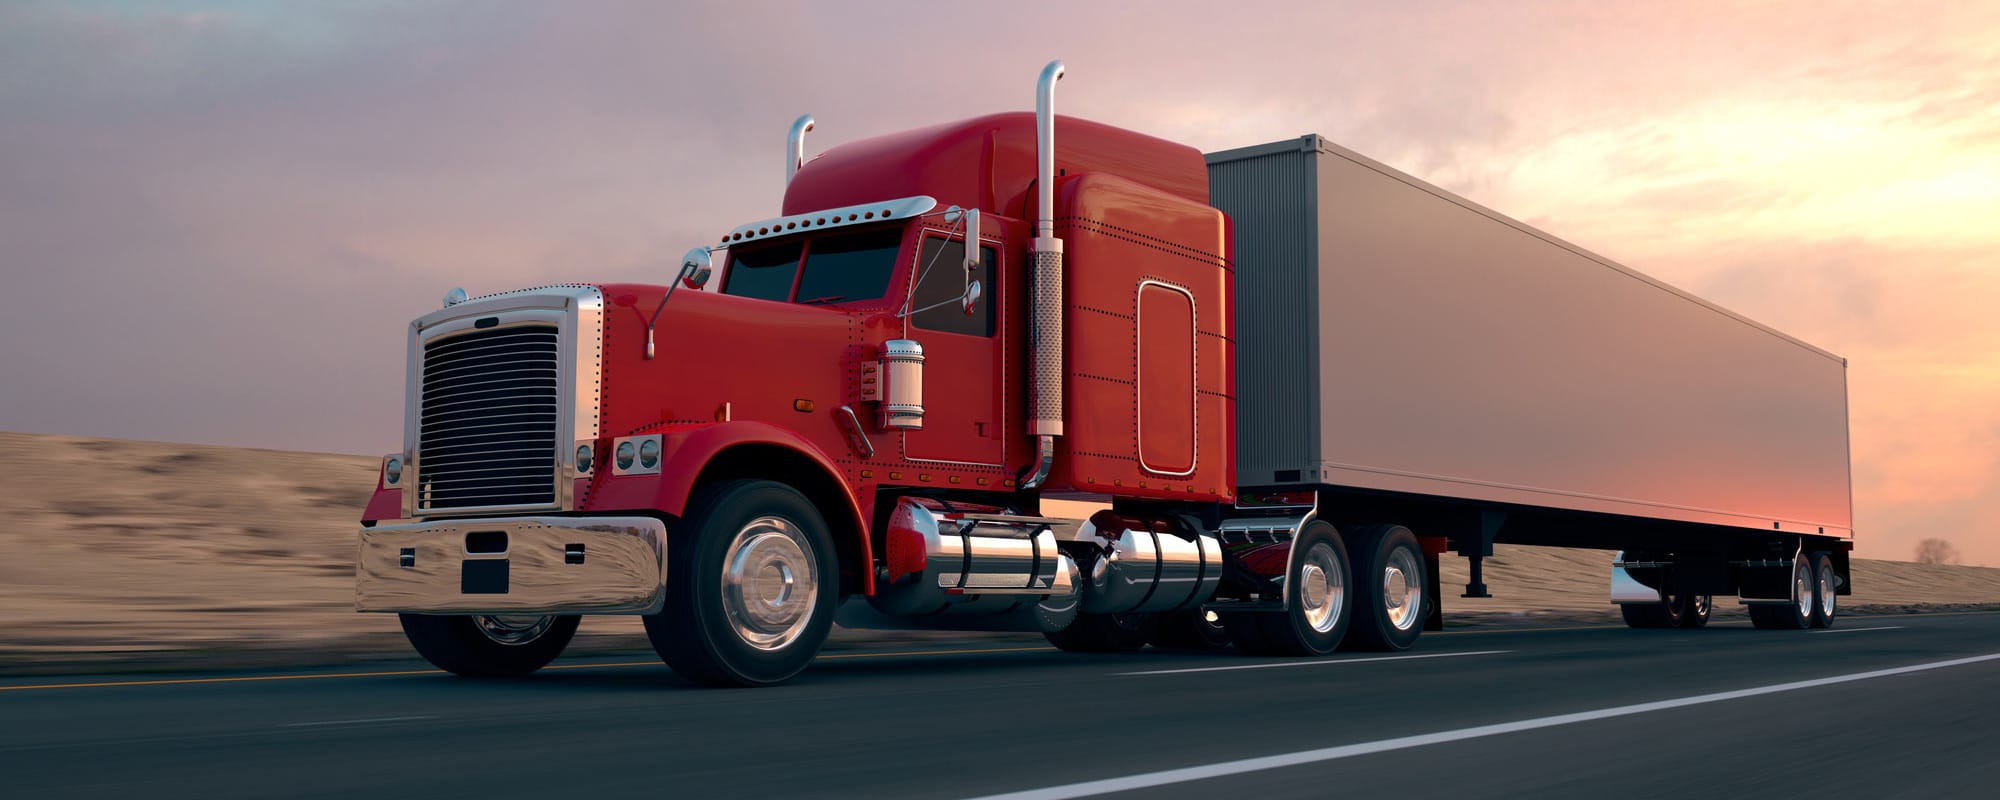 Image of tractor trailer driving with the sun setting in the background